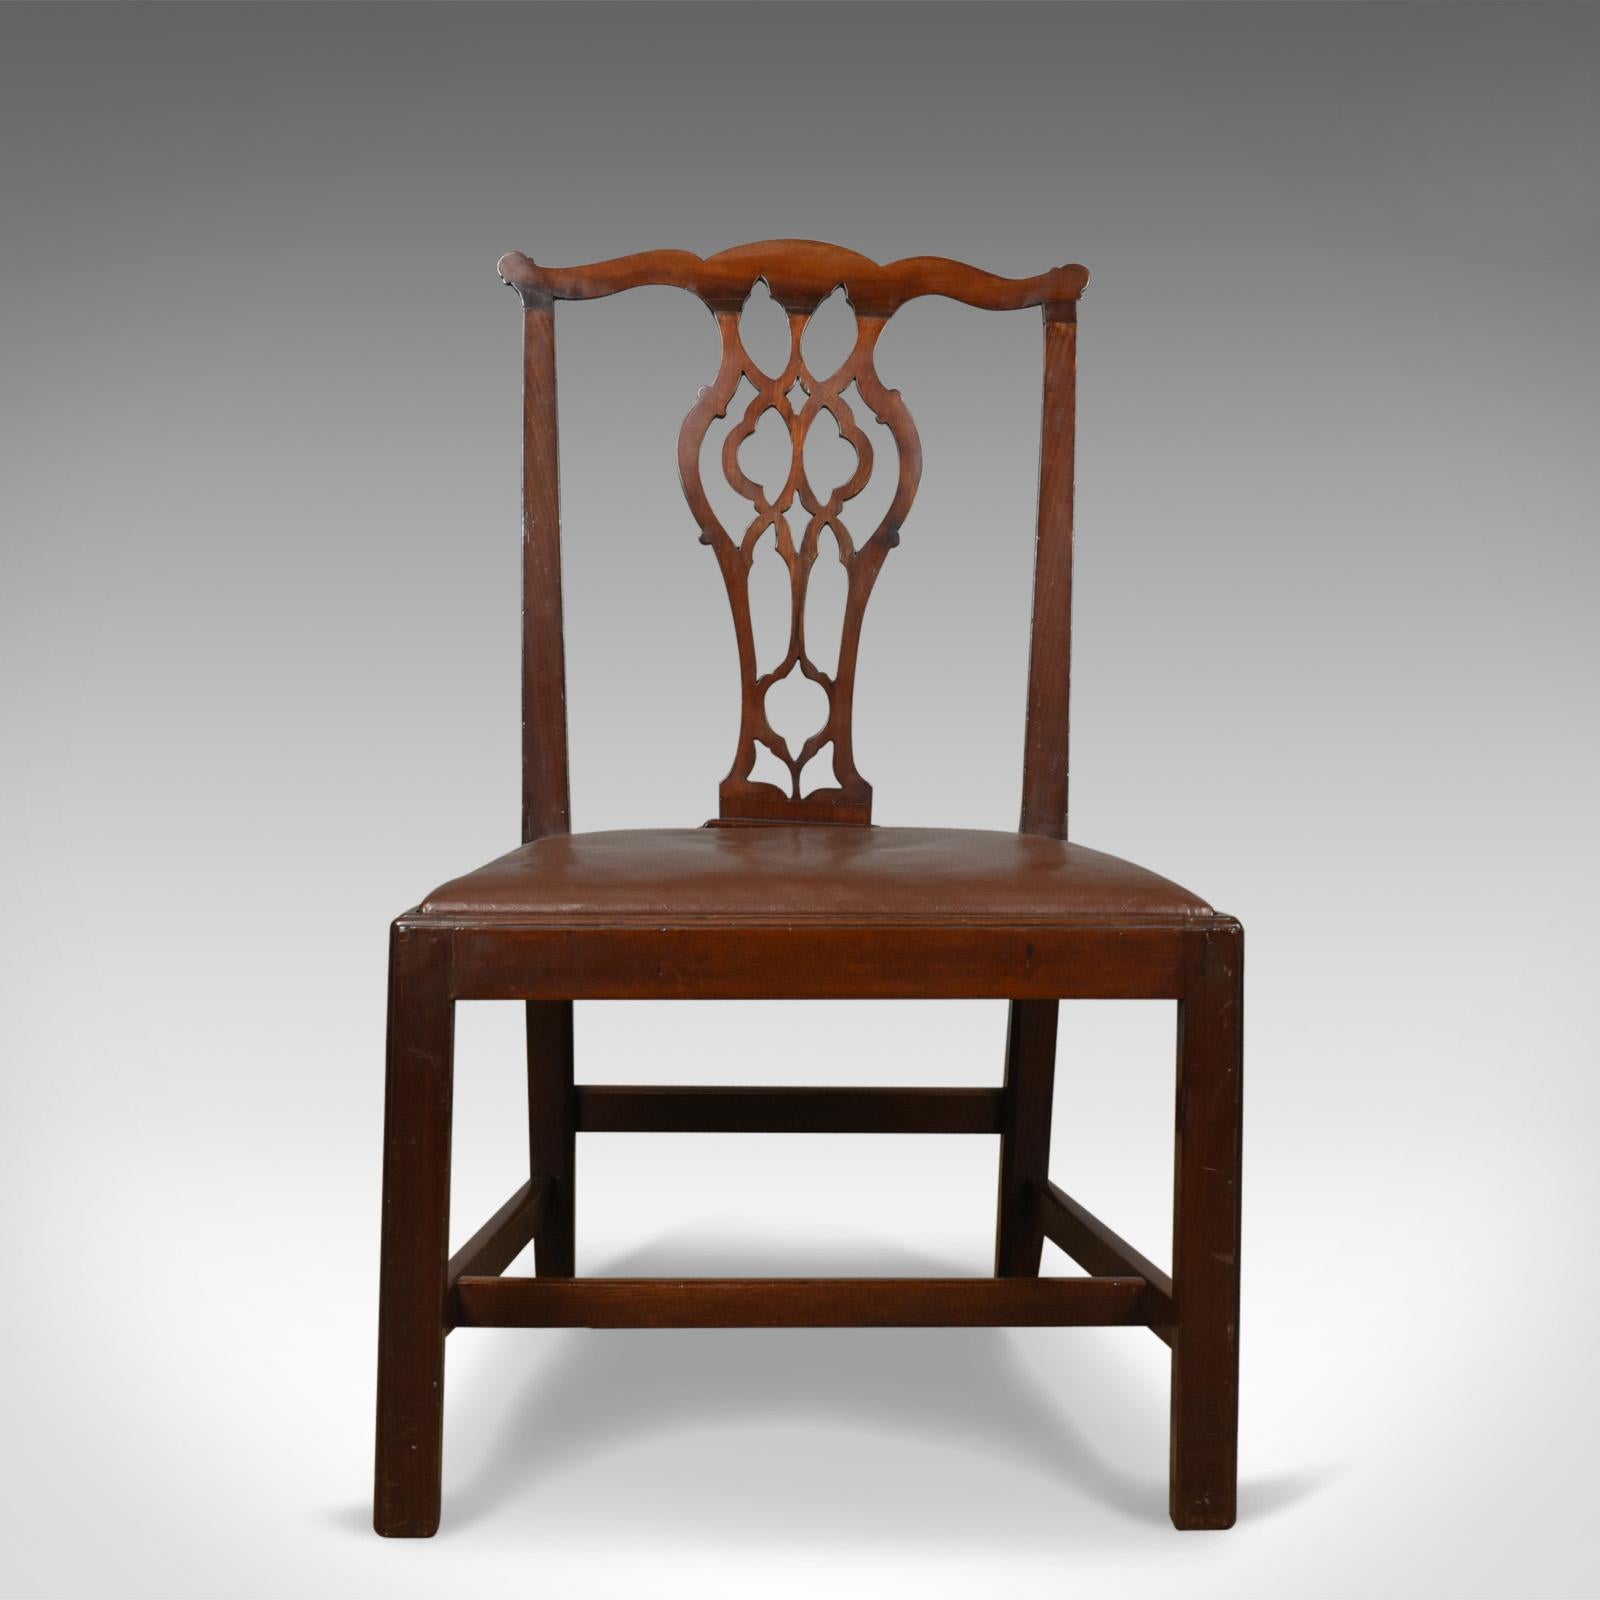 This is a set of six antique dining chairs in mahogany. English, late Georgian in the manner of Chippendale dating to the early 19th century, circa 1800.

An attractive set of six, English, early 19th century dining chairs
In the desirable form